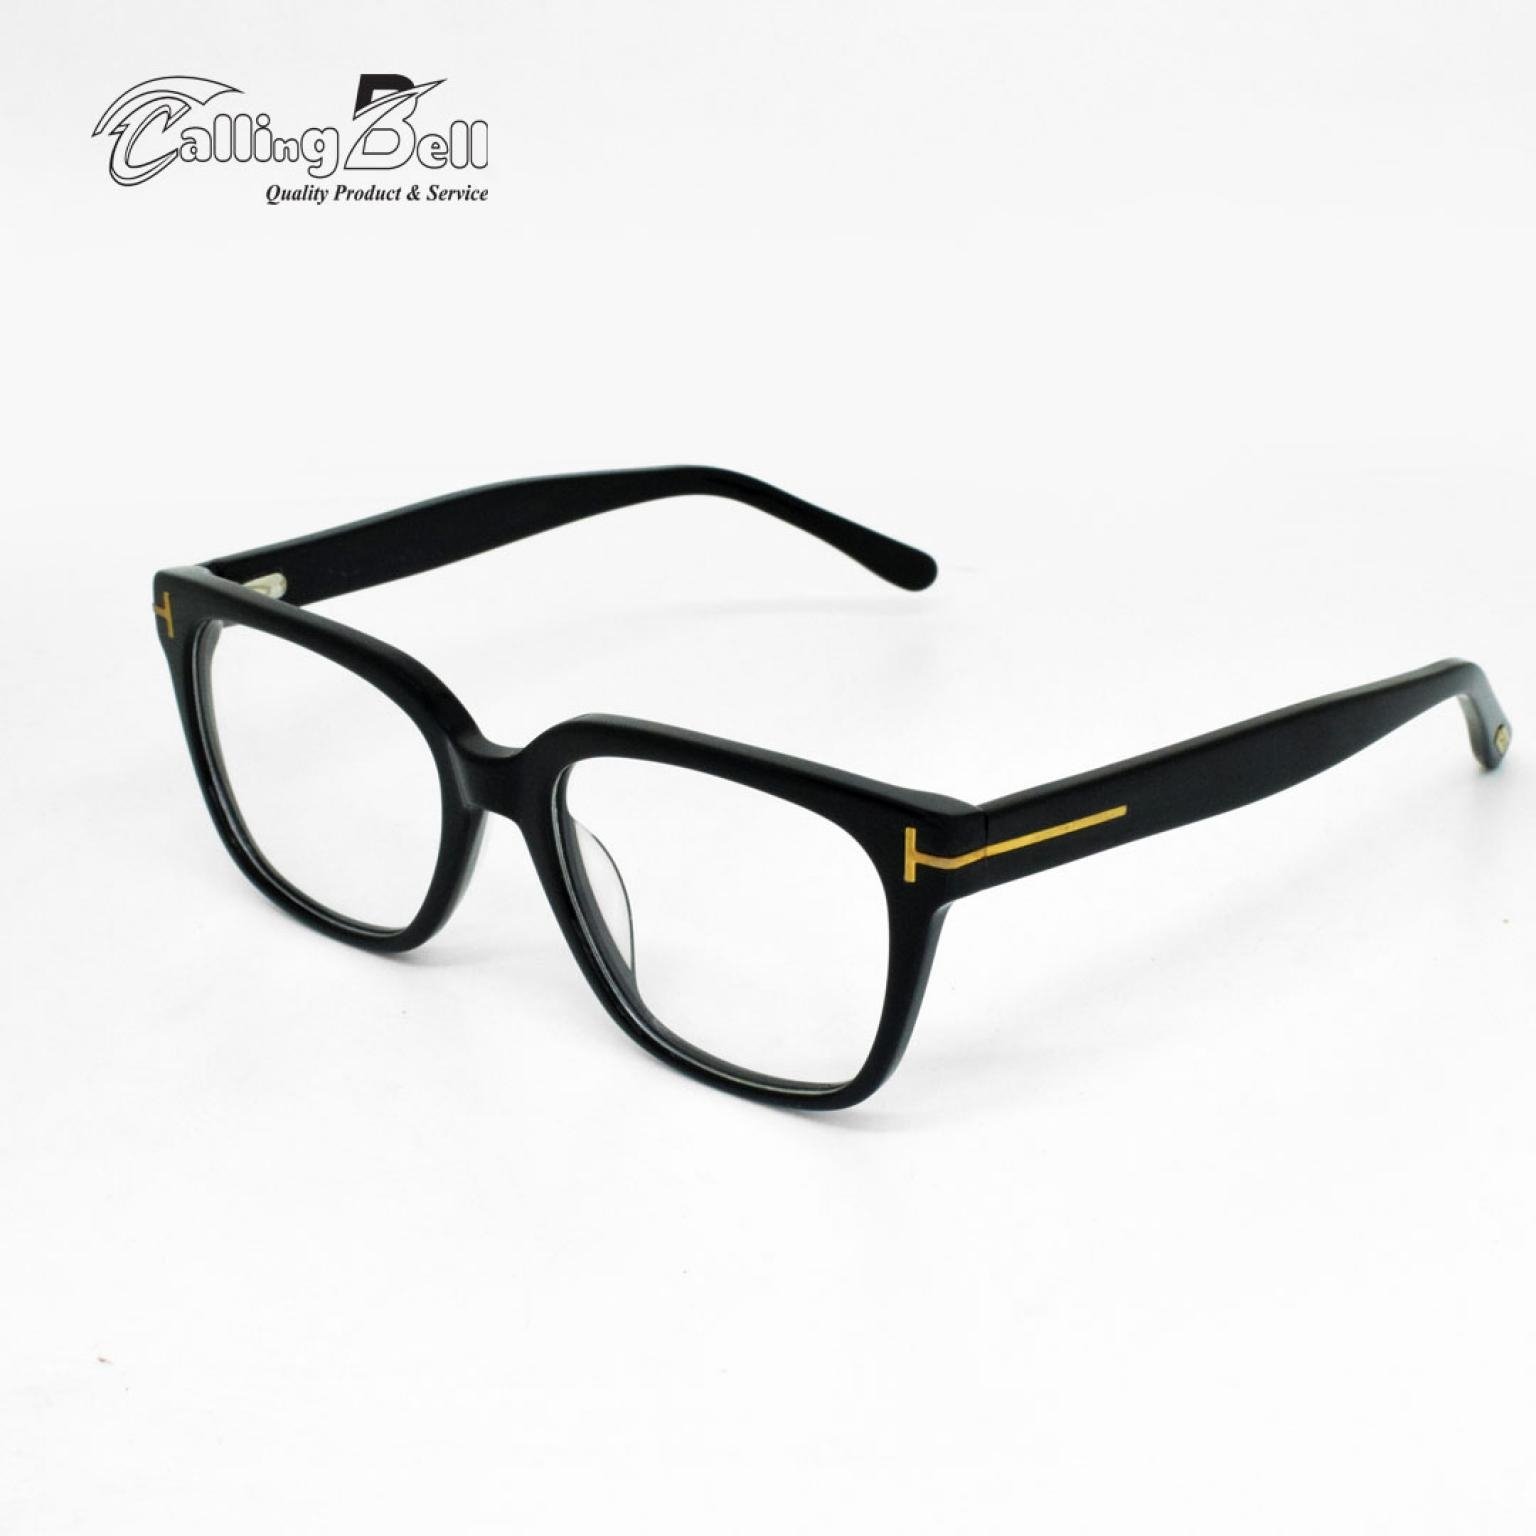 PREMIUM QUALITY ACTATE FRAME EYE WEAR FOR MEN?S CLASSIC LOOK